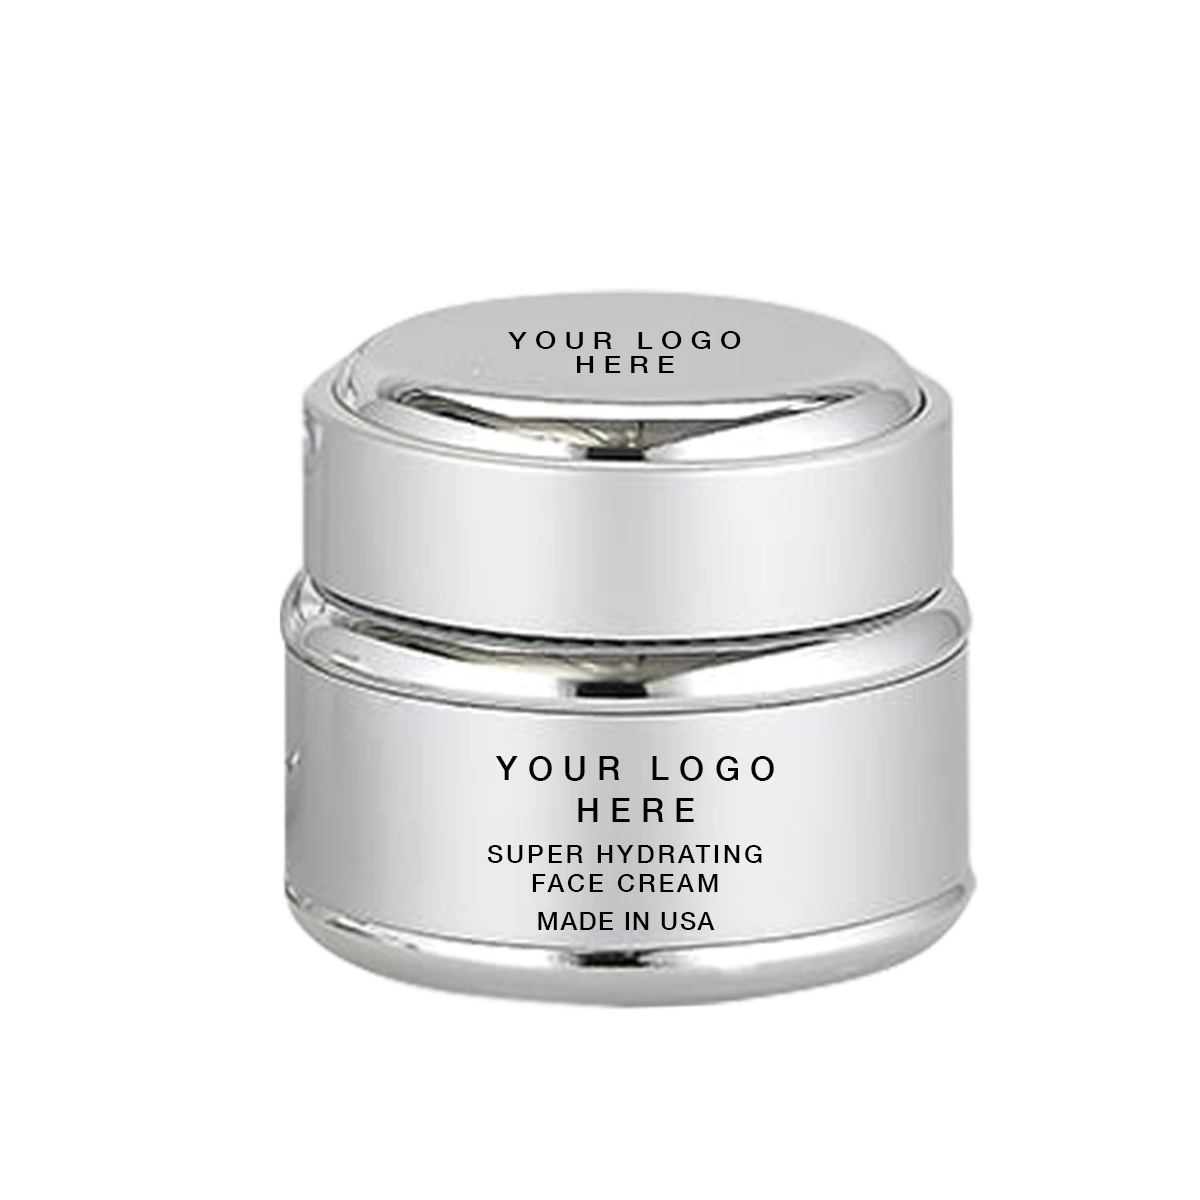 Super Hydrating Face Cream - Hyaluronic Acid and Peptides